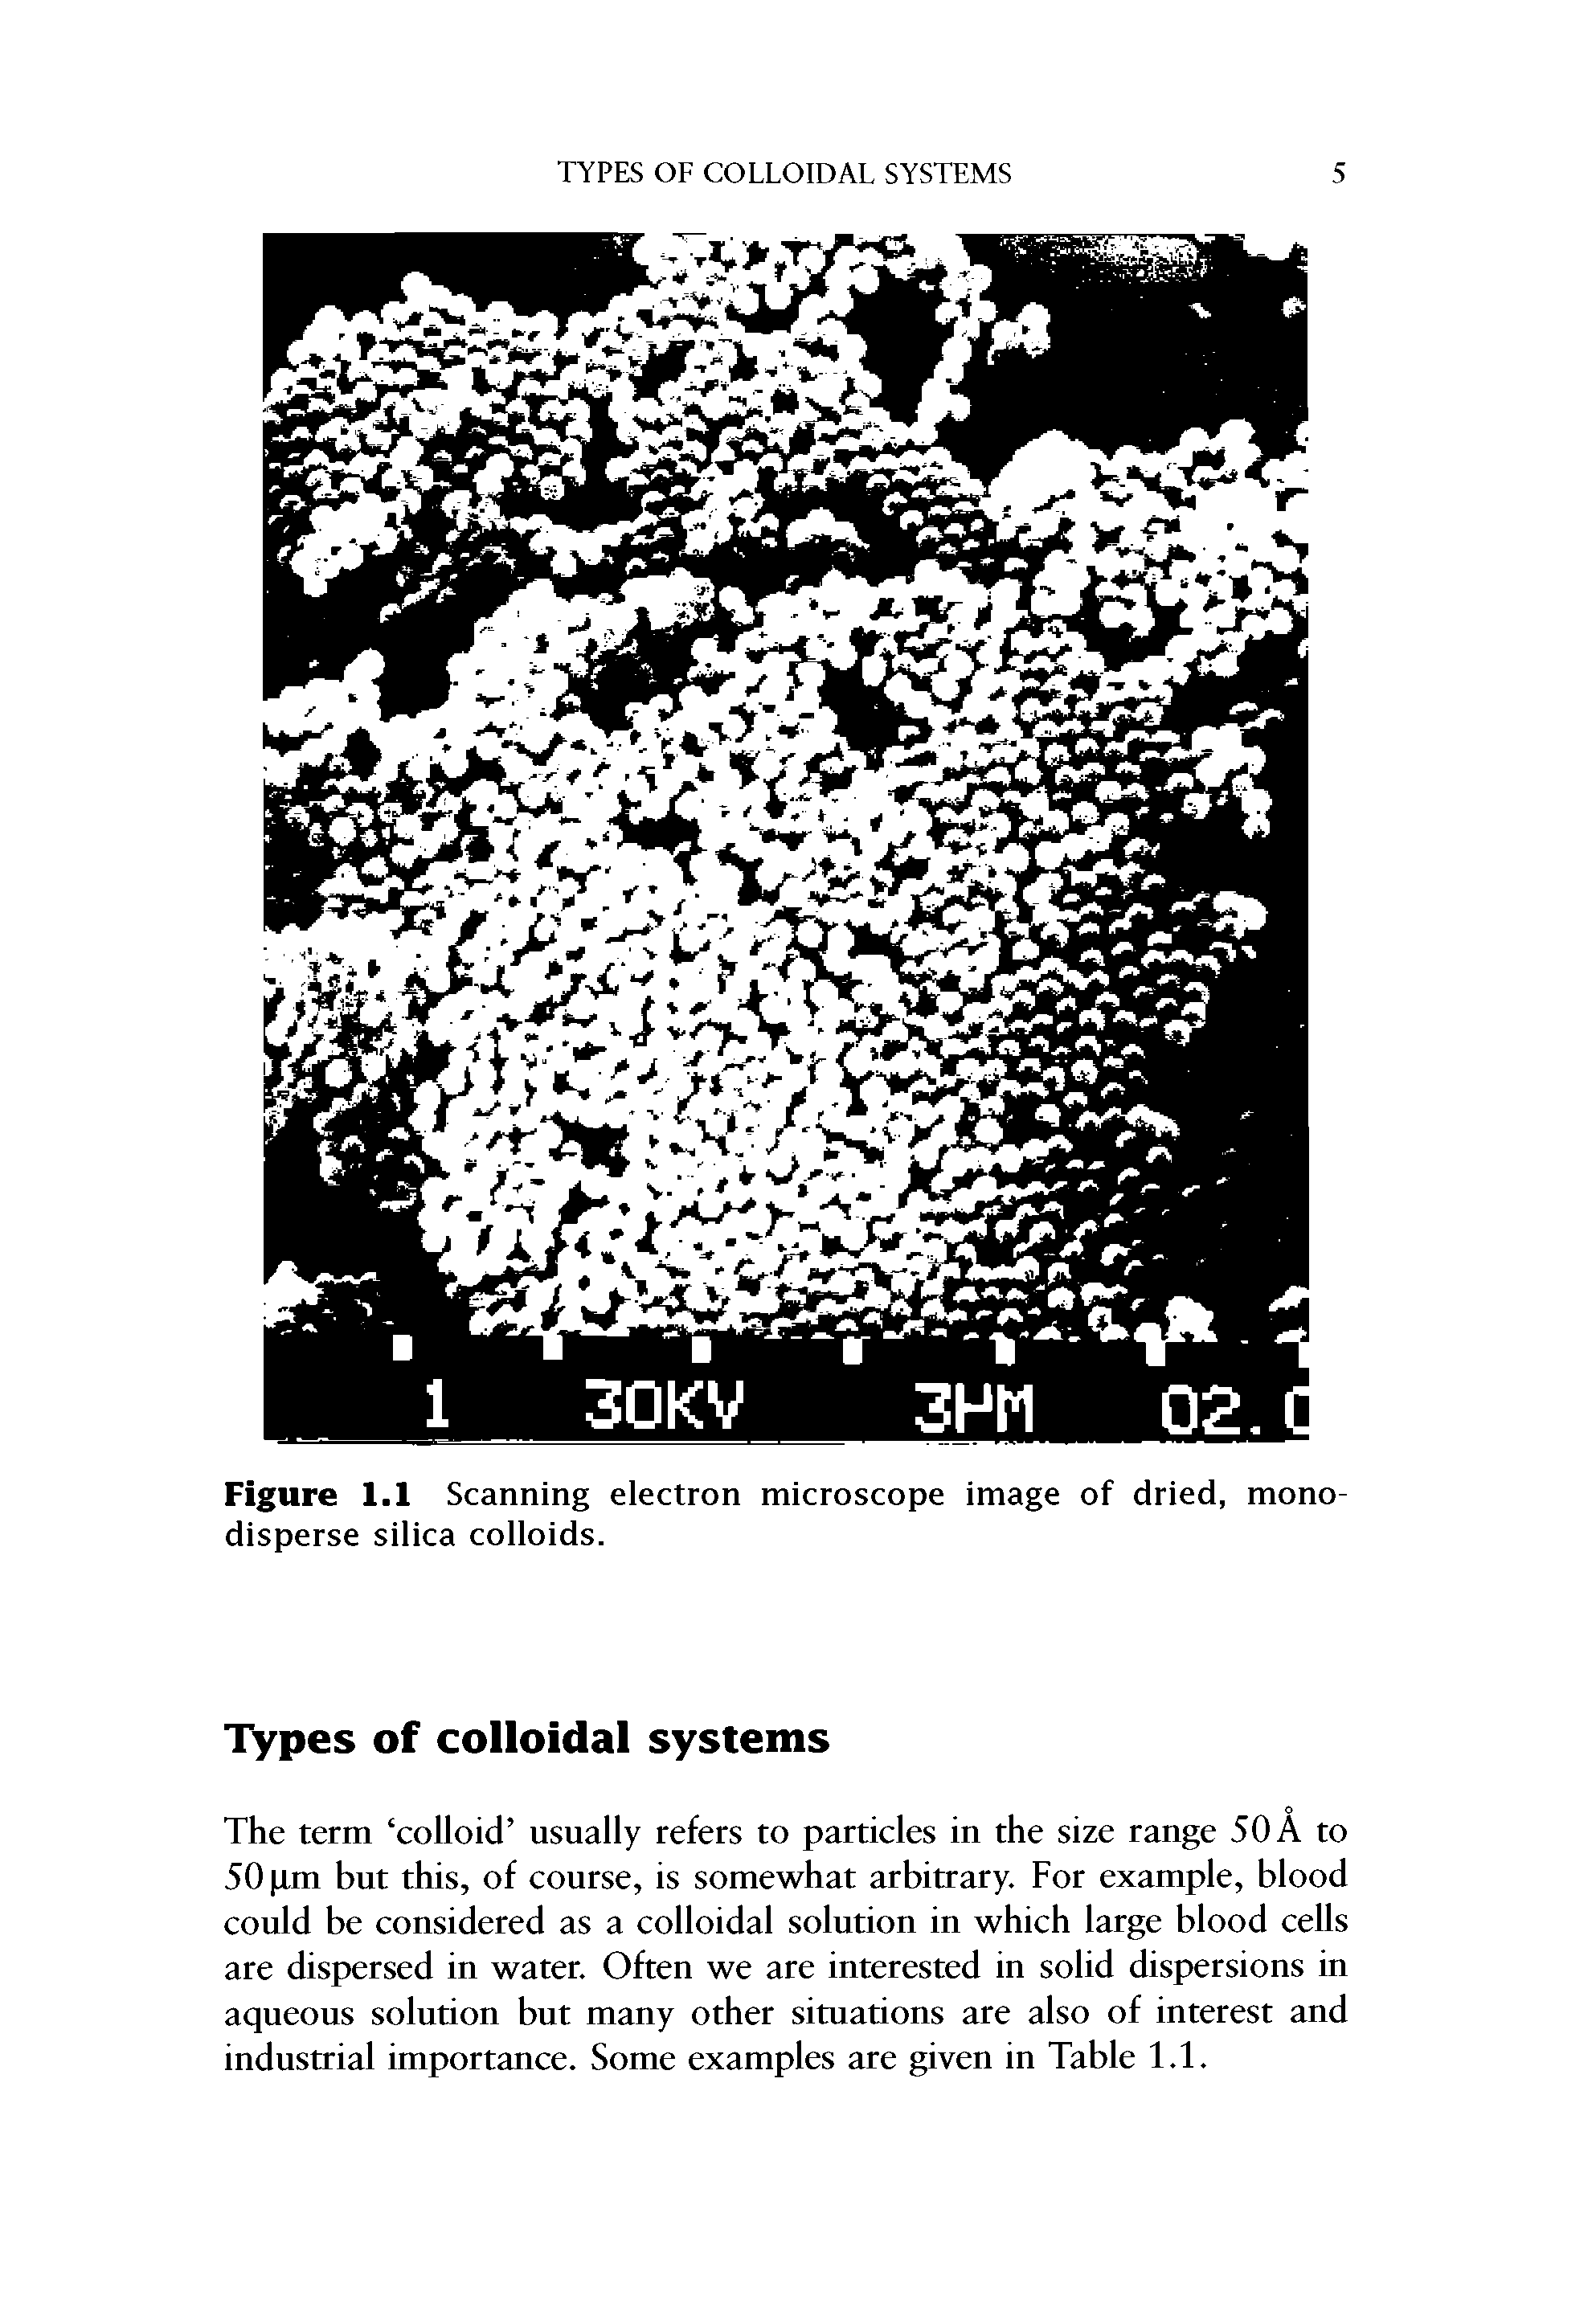 Figure 1.1 Scanning electron microscope image of dried, mono-disperse silica colloids.